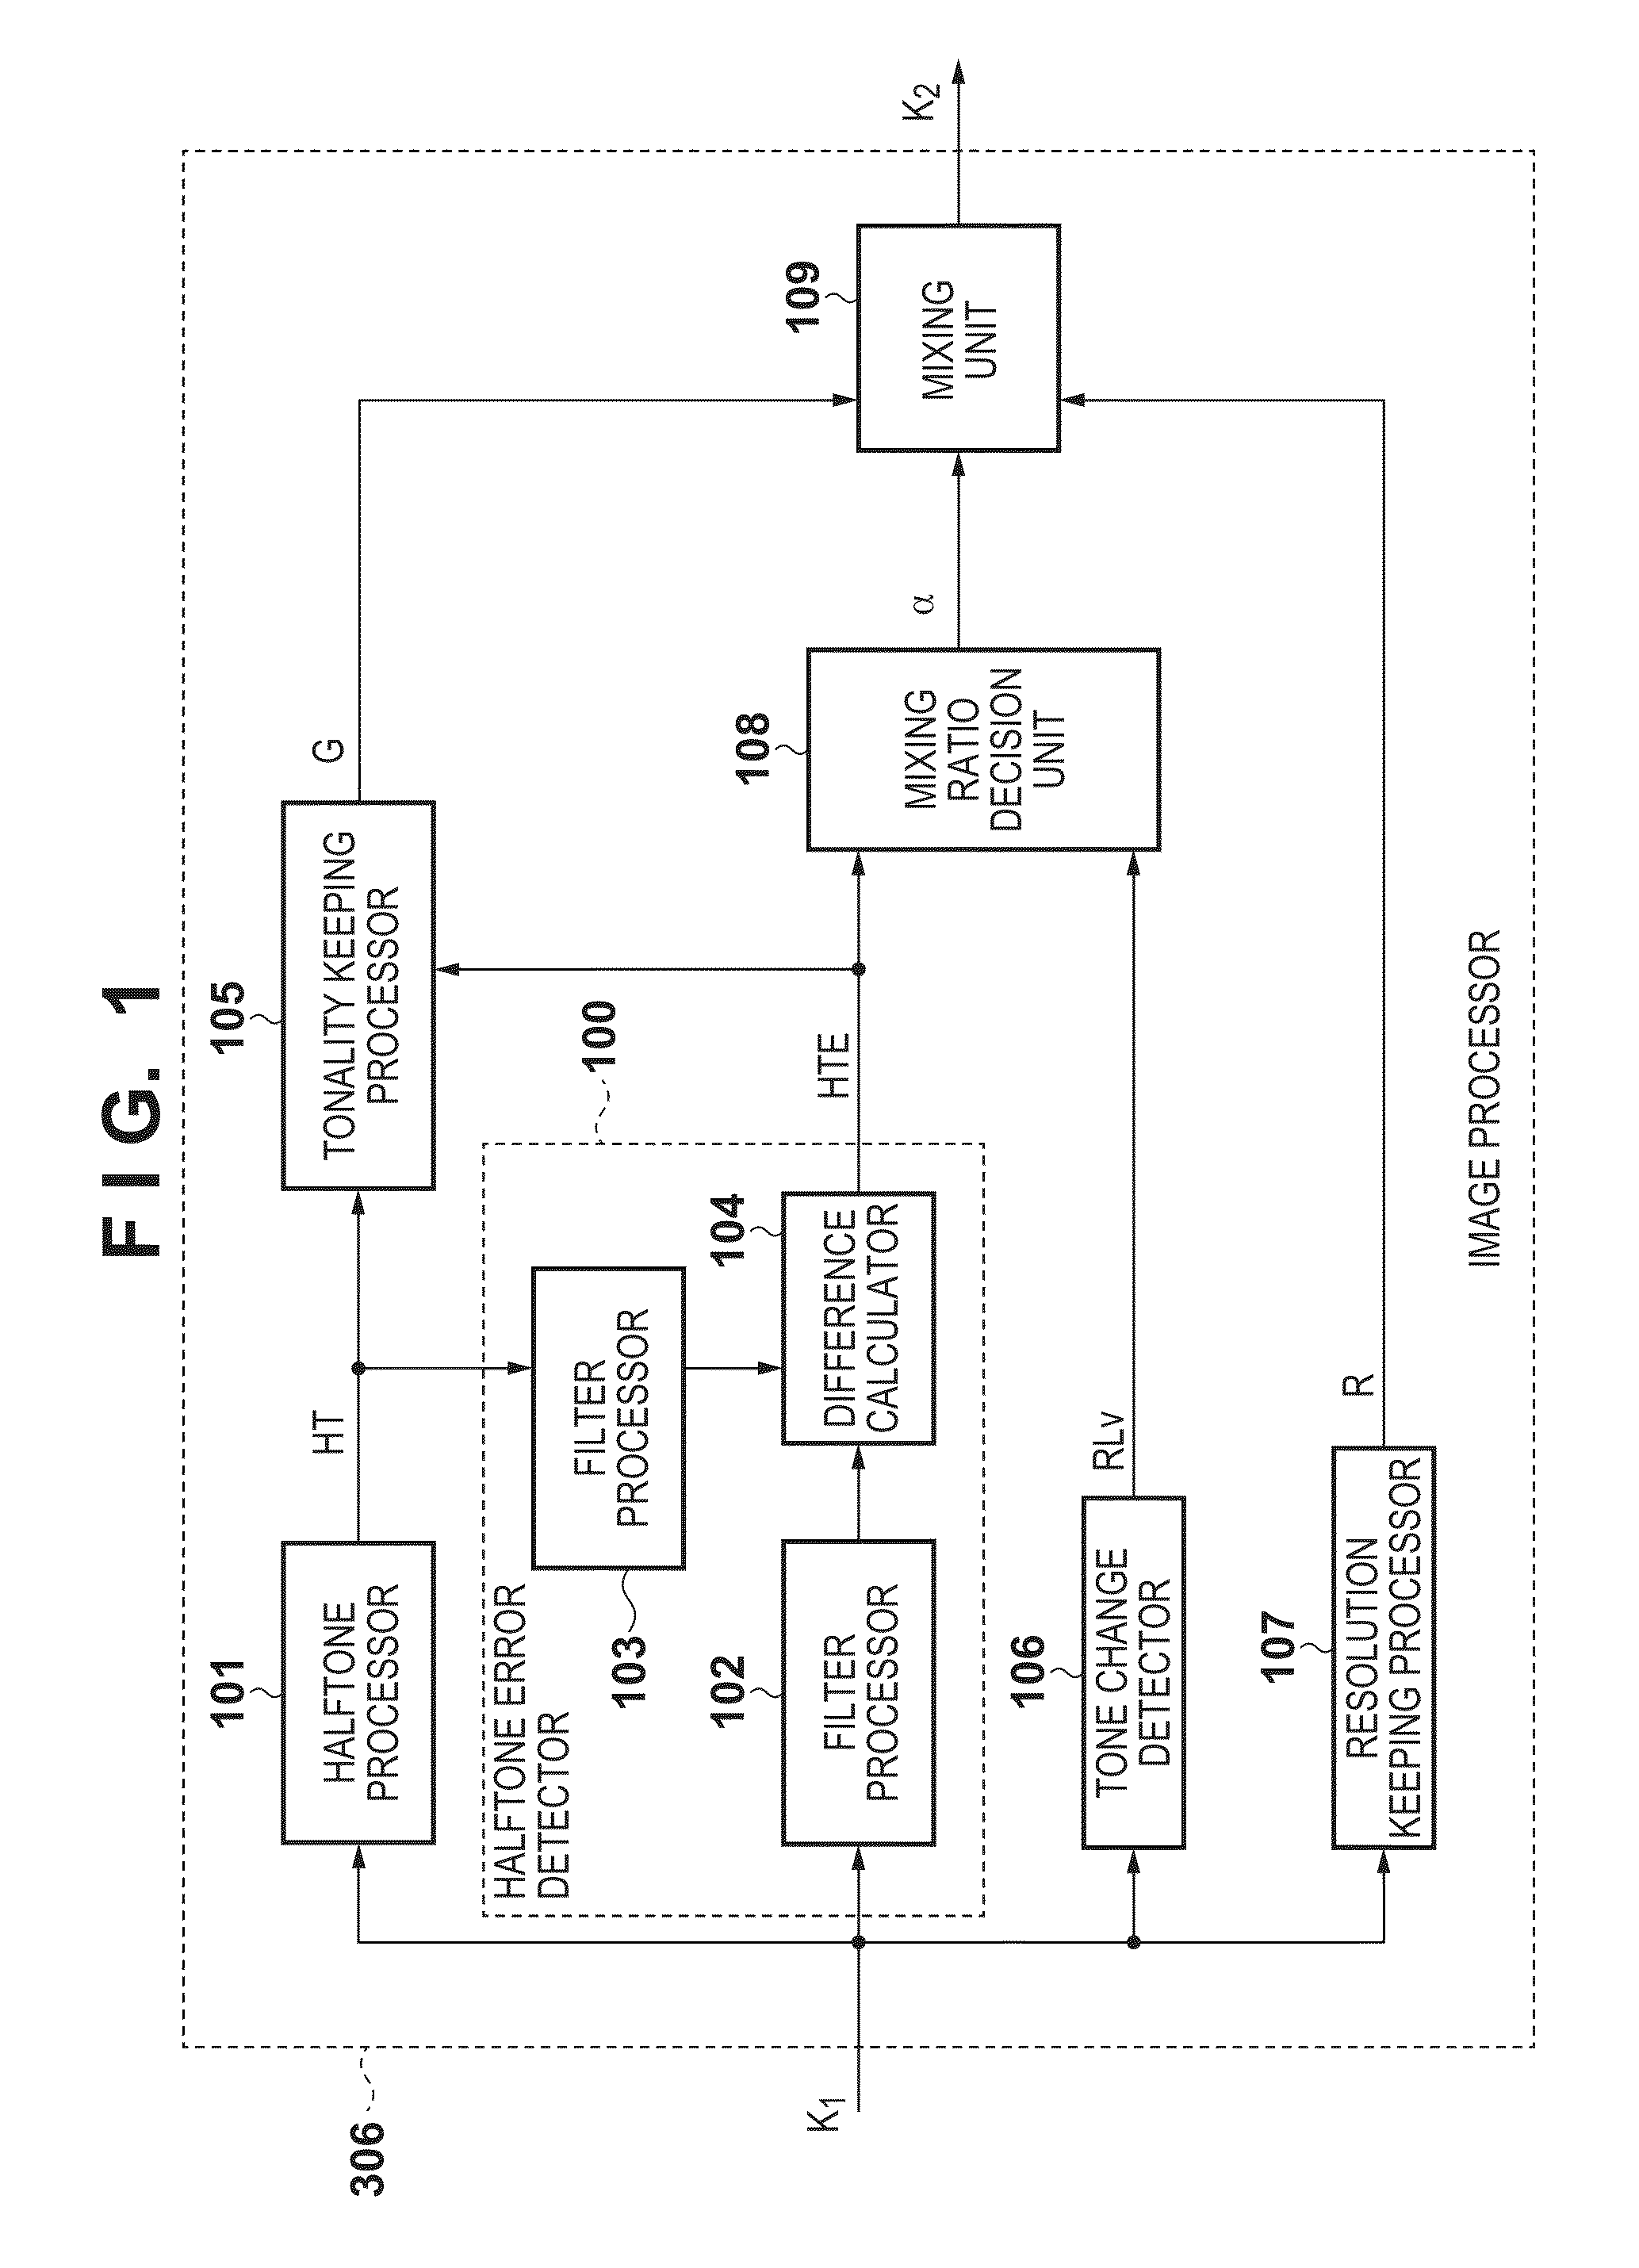 Image processing apparatus for executing halftone processing, image processing system, image processing method, program product, and computer-readable storage medium